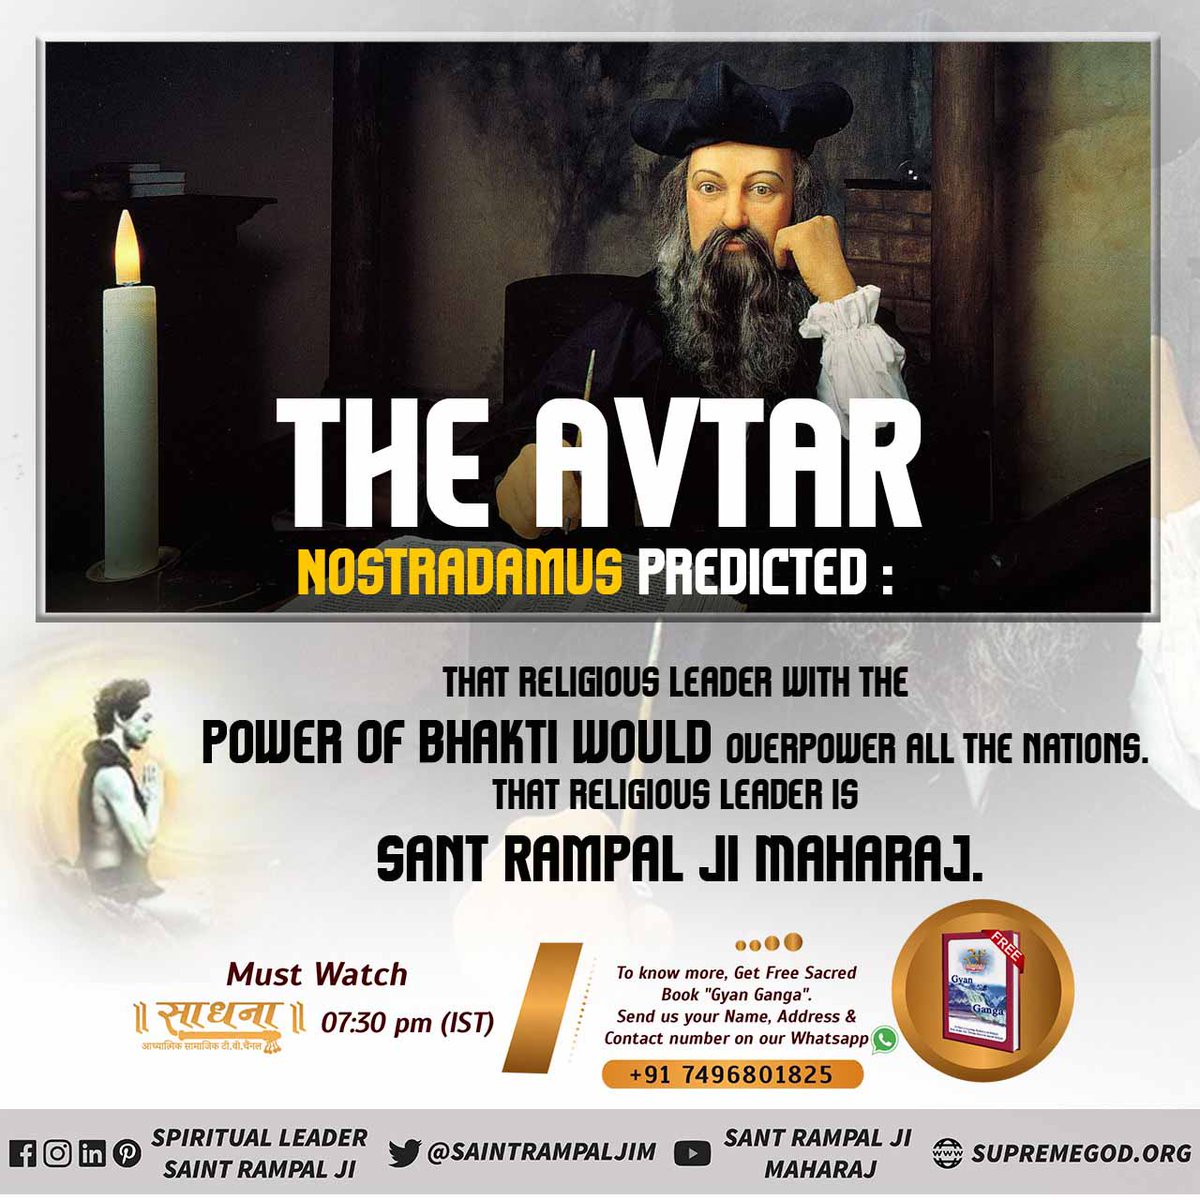 #आदि_सनातनधर्म_होगाप्रतिष्ठित
Revival of sanatan dharma

Nostradamus says about Saint Rampal Ji Maharaj that that great man will reveal new knowledge. Hearing this, people will bite their teeth. He also reveals the secrets of divine powers.